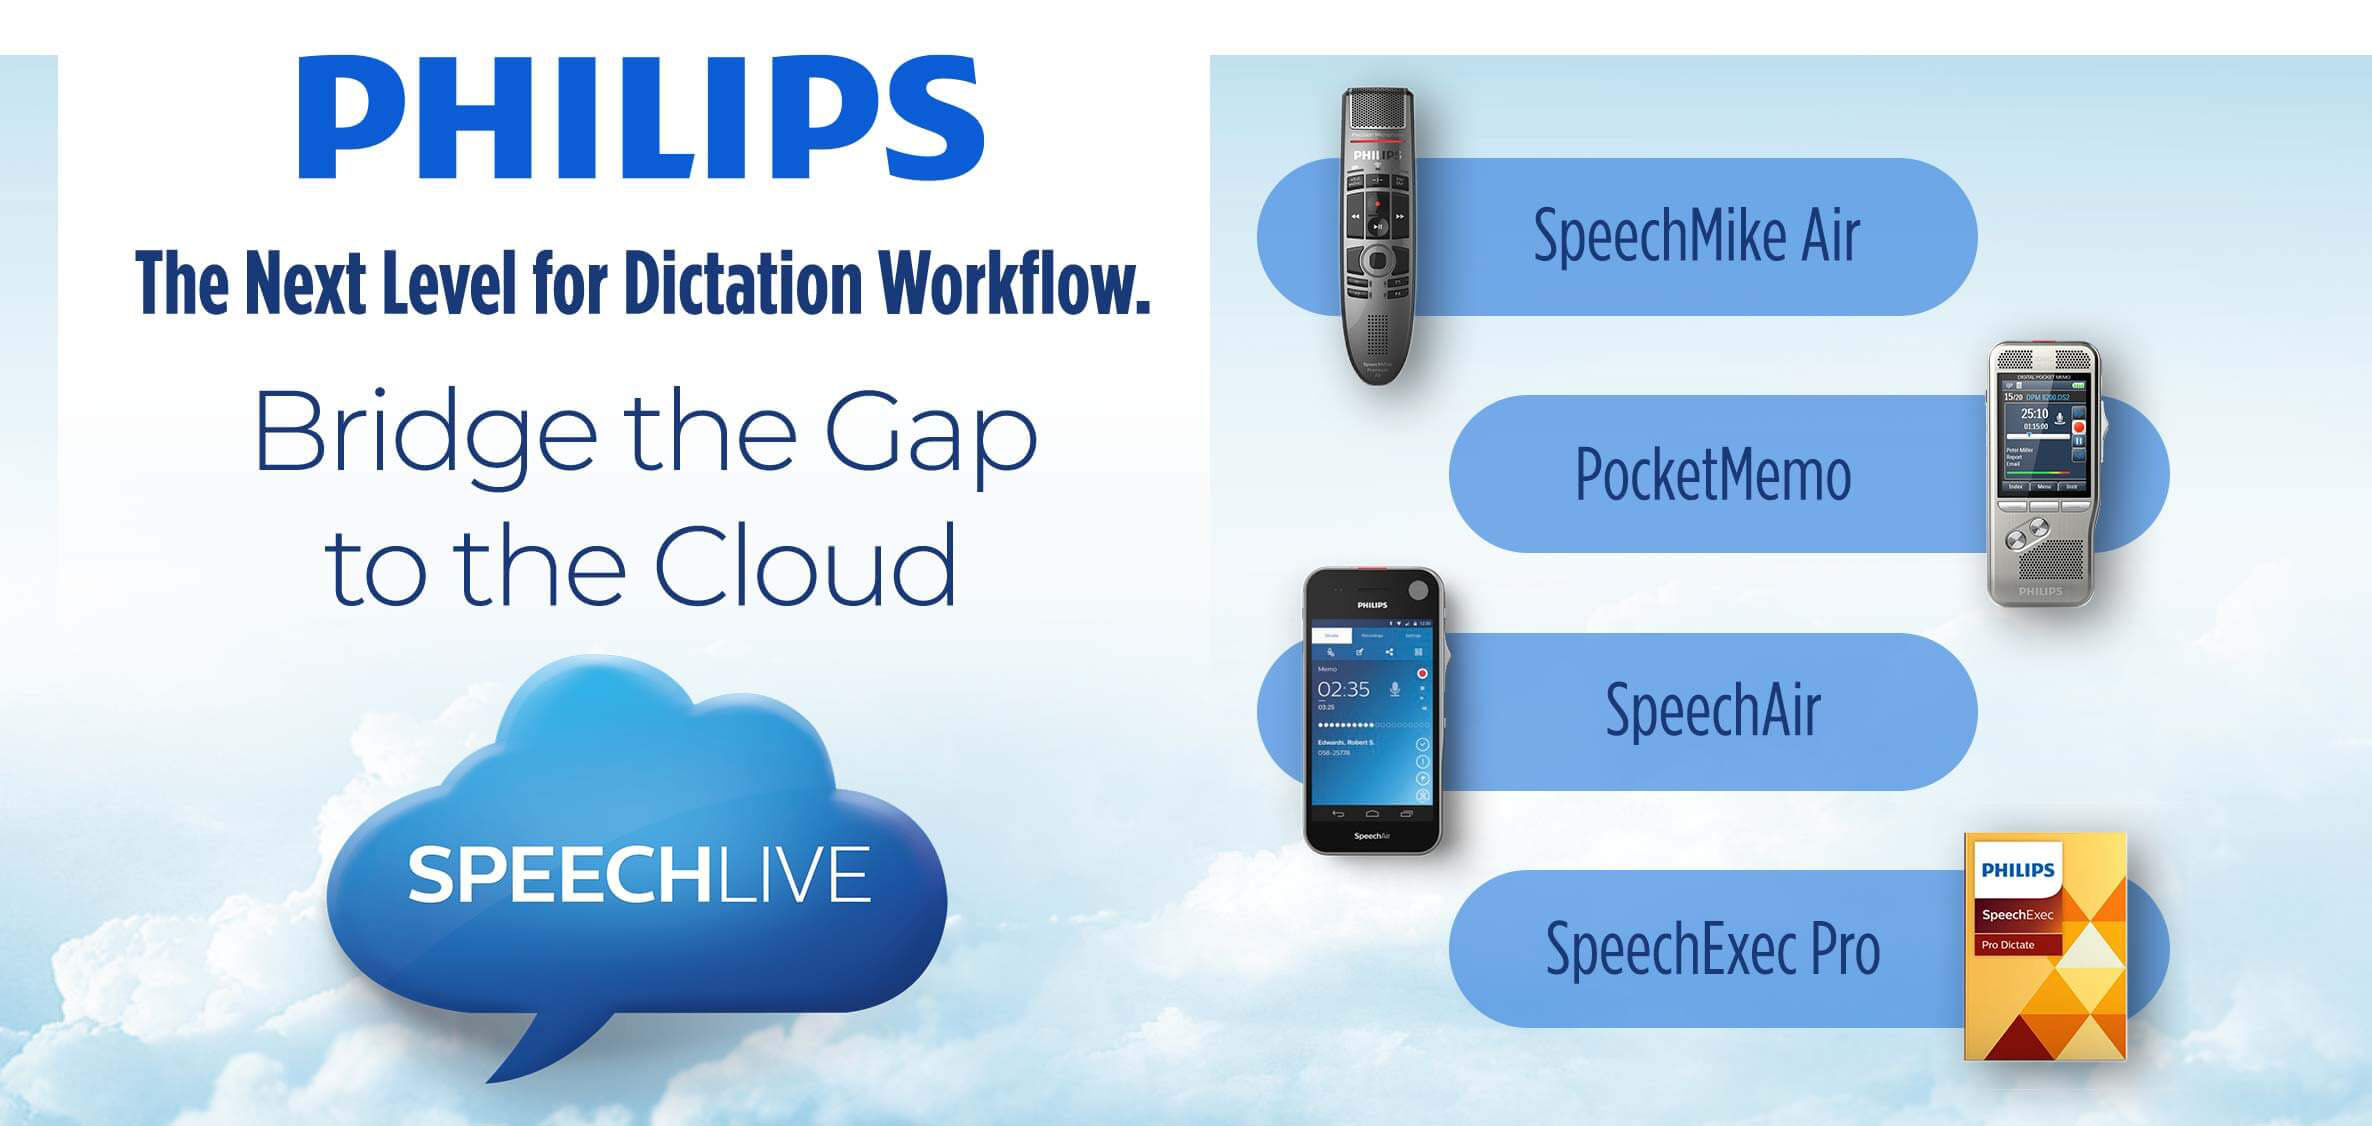 The next level for dictation workflow. Philips SpeechLive